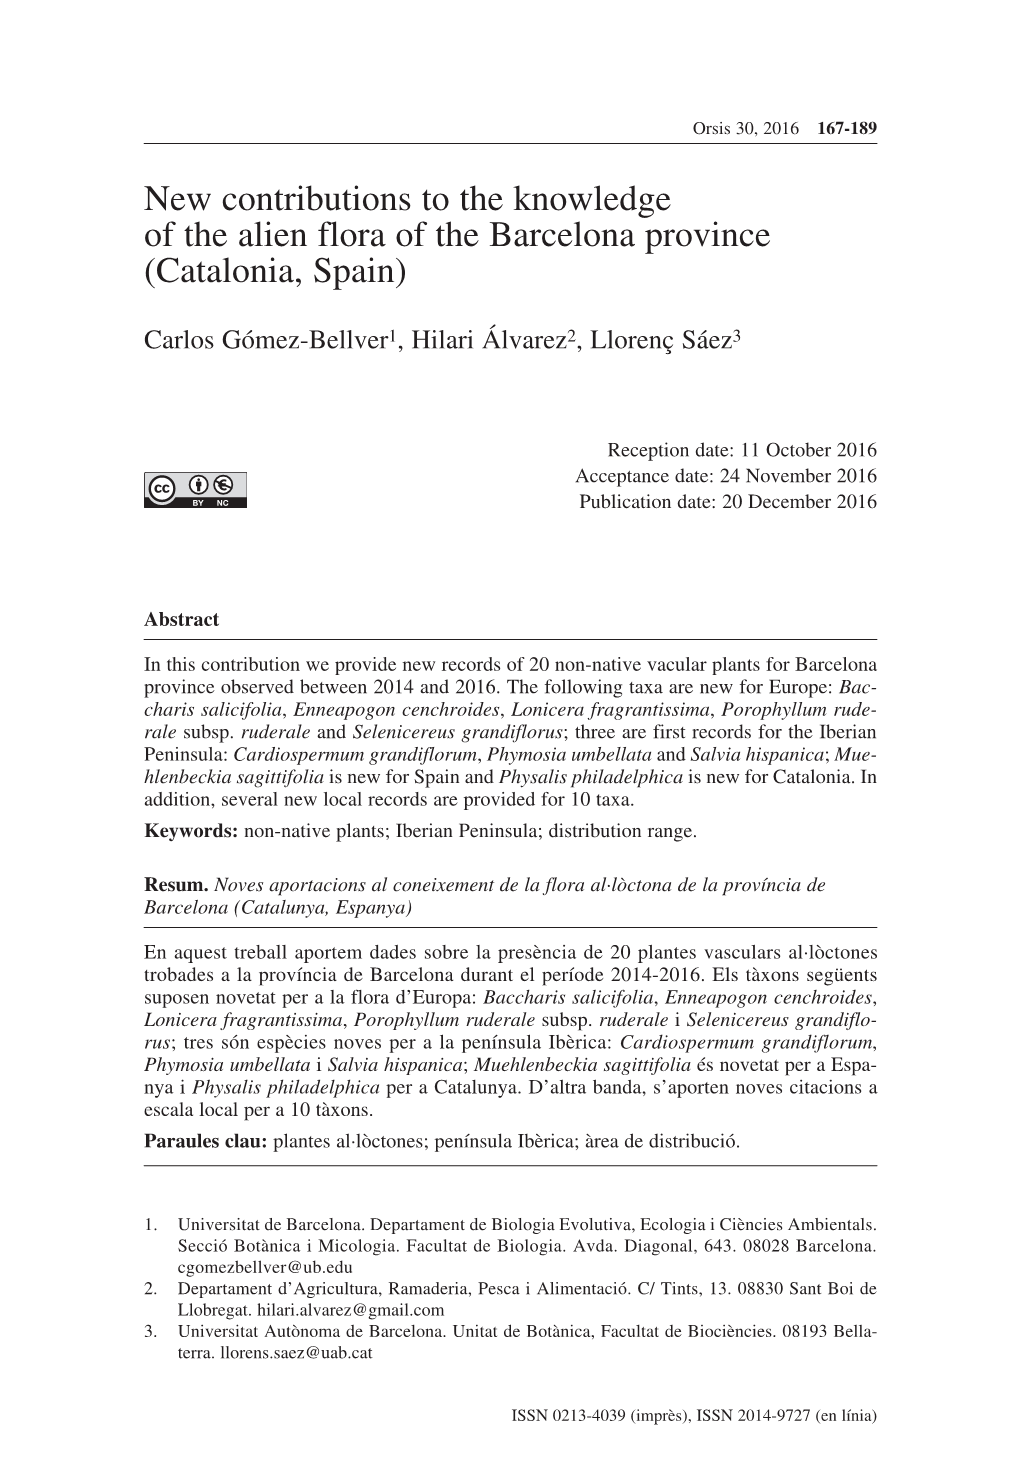 New Contributions to the Knowledge of the Alien Flora of the Barcelona Province (Catalonia, Spain)